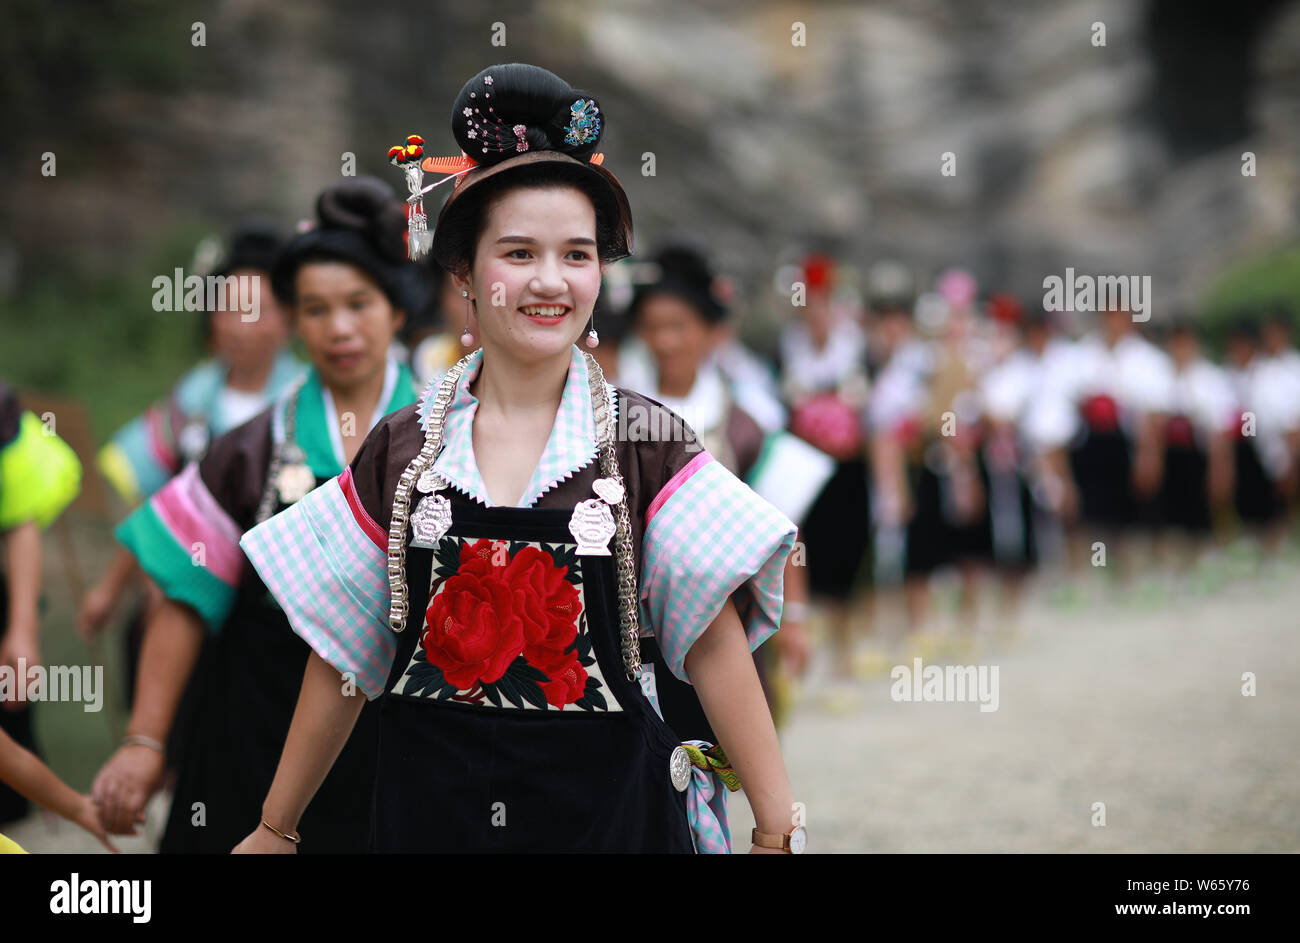 Miao people wearing traditional costumes of Miao ethnic group celebrate the  Chixin Festival in Shiqiao village, Danzhai county, Qiandongnan Miao and D  Stock Photo - Alamy